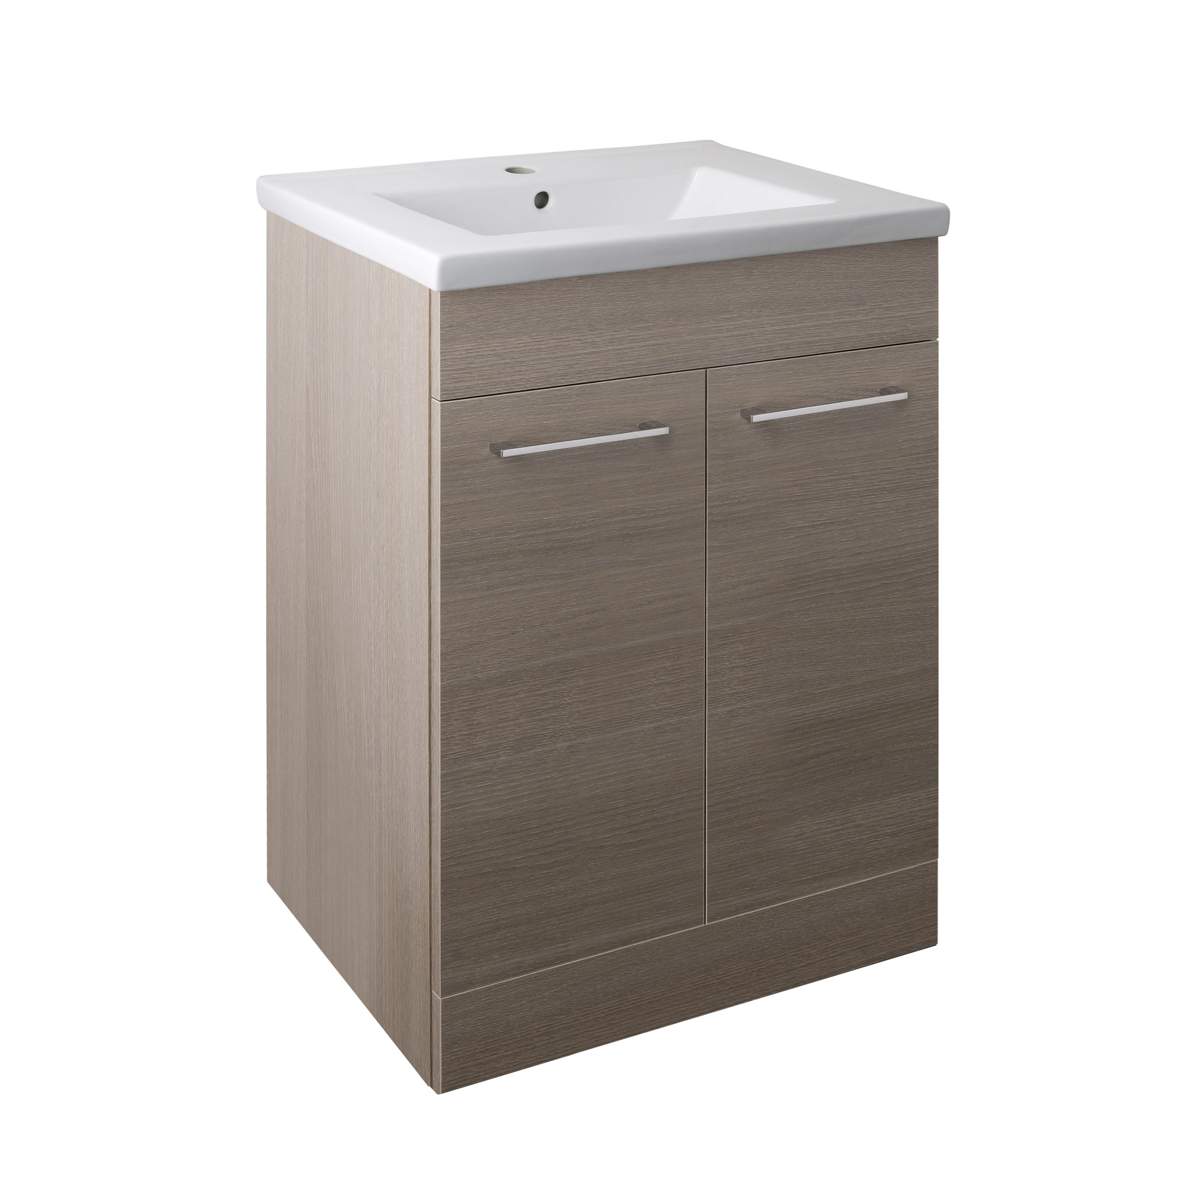 JTP Pace Units 600mm Floor Mounted Unit with Doors and Basin in Grey